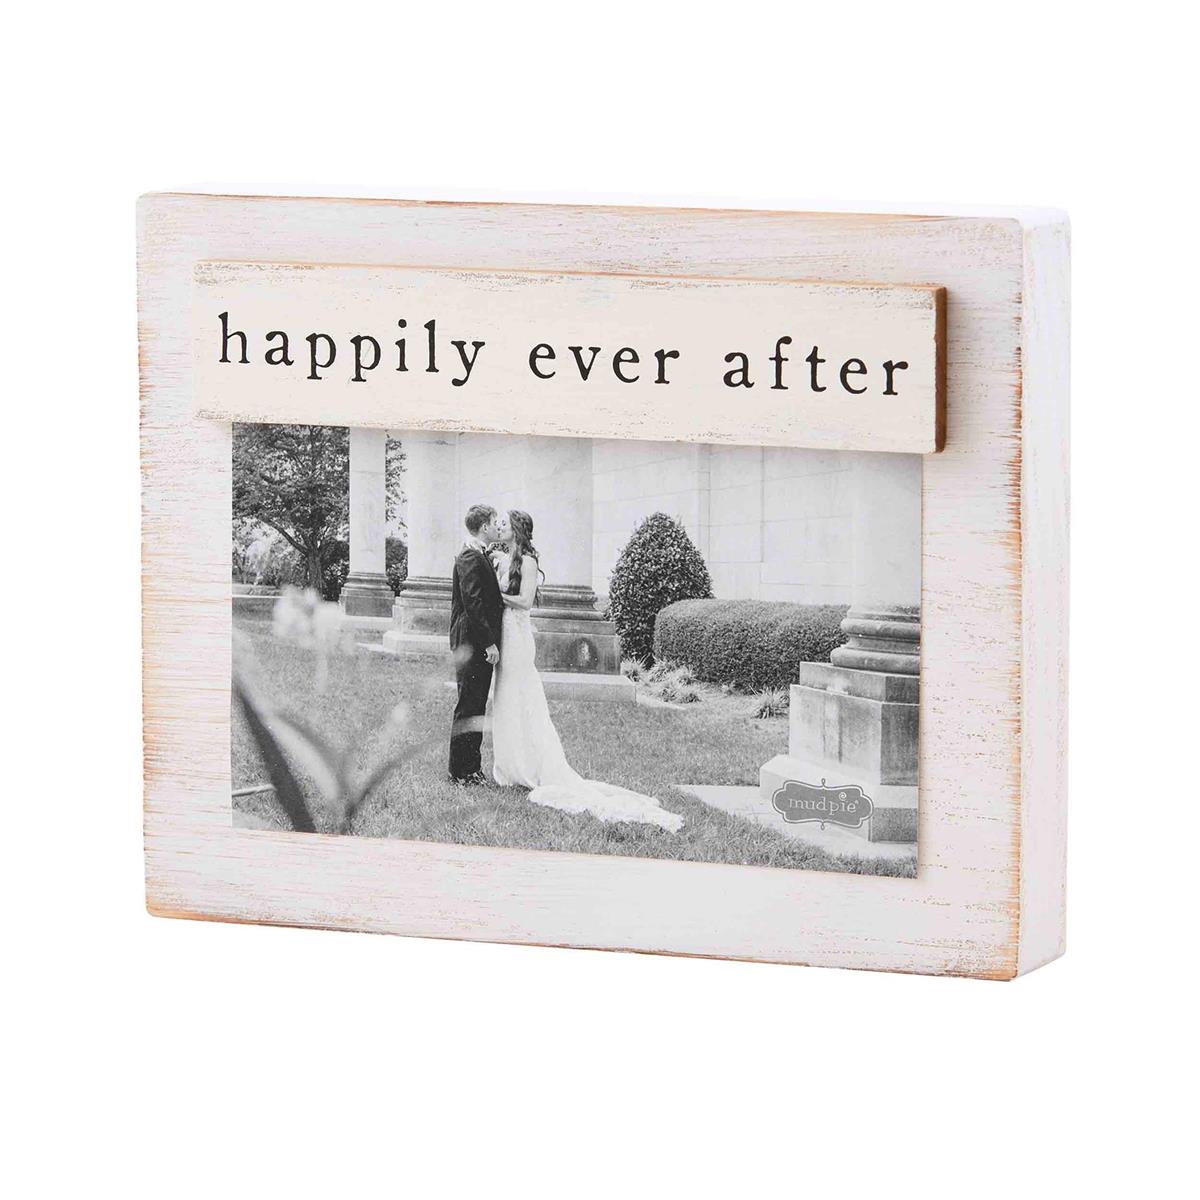 Happily ever after magnetic block frame